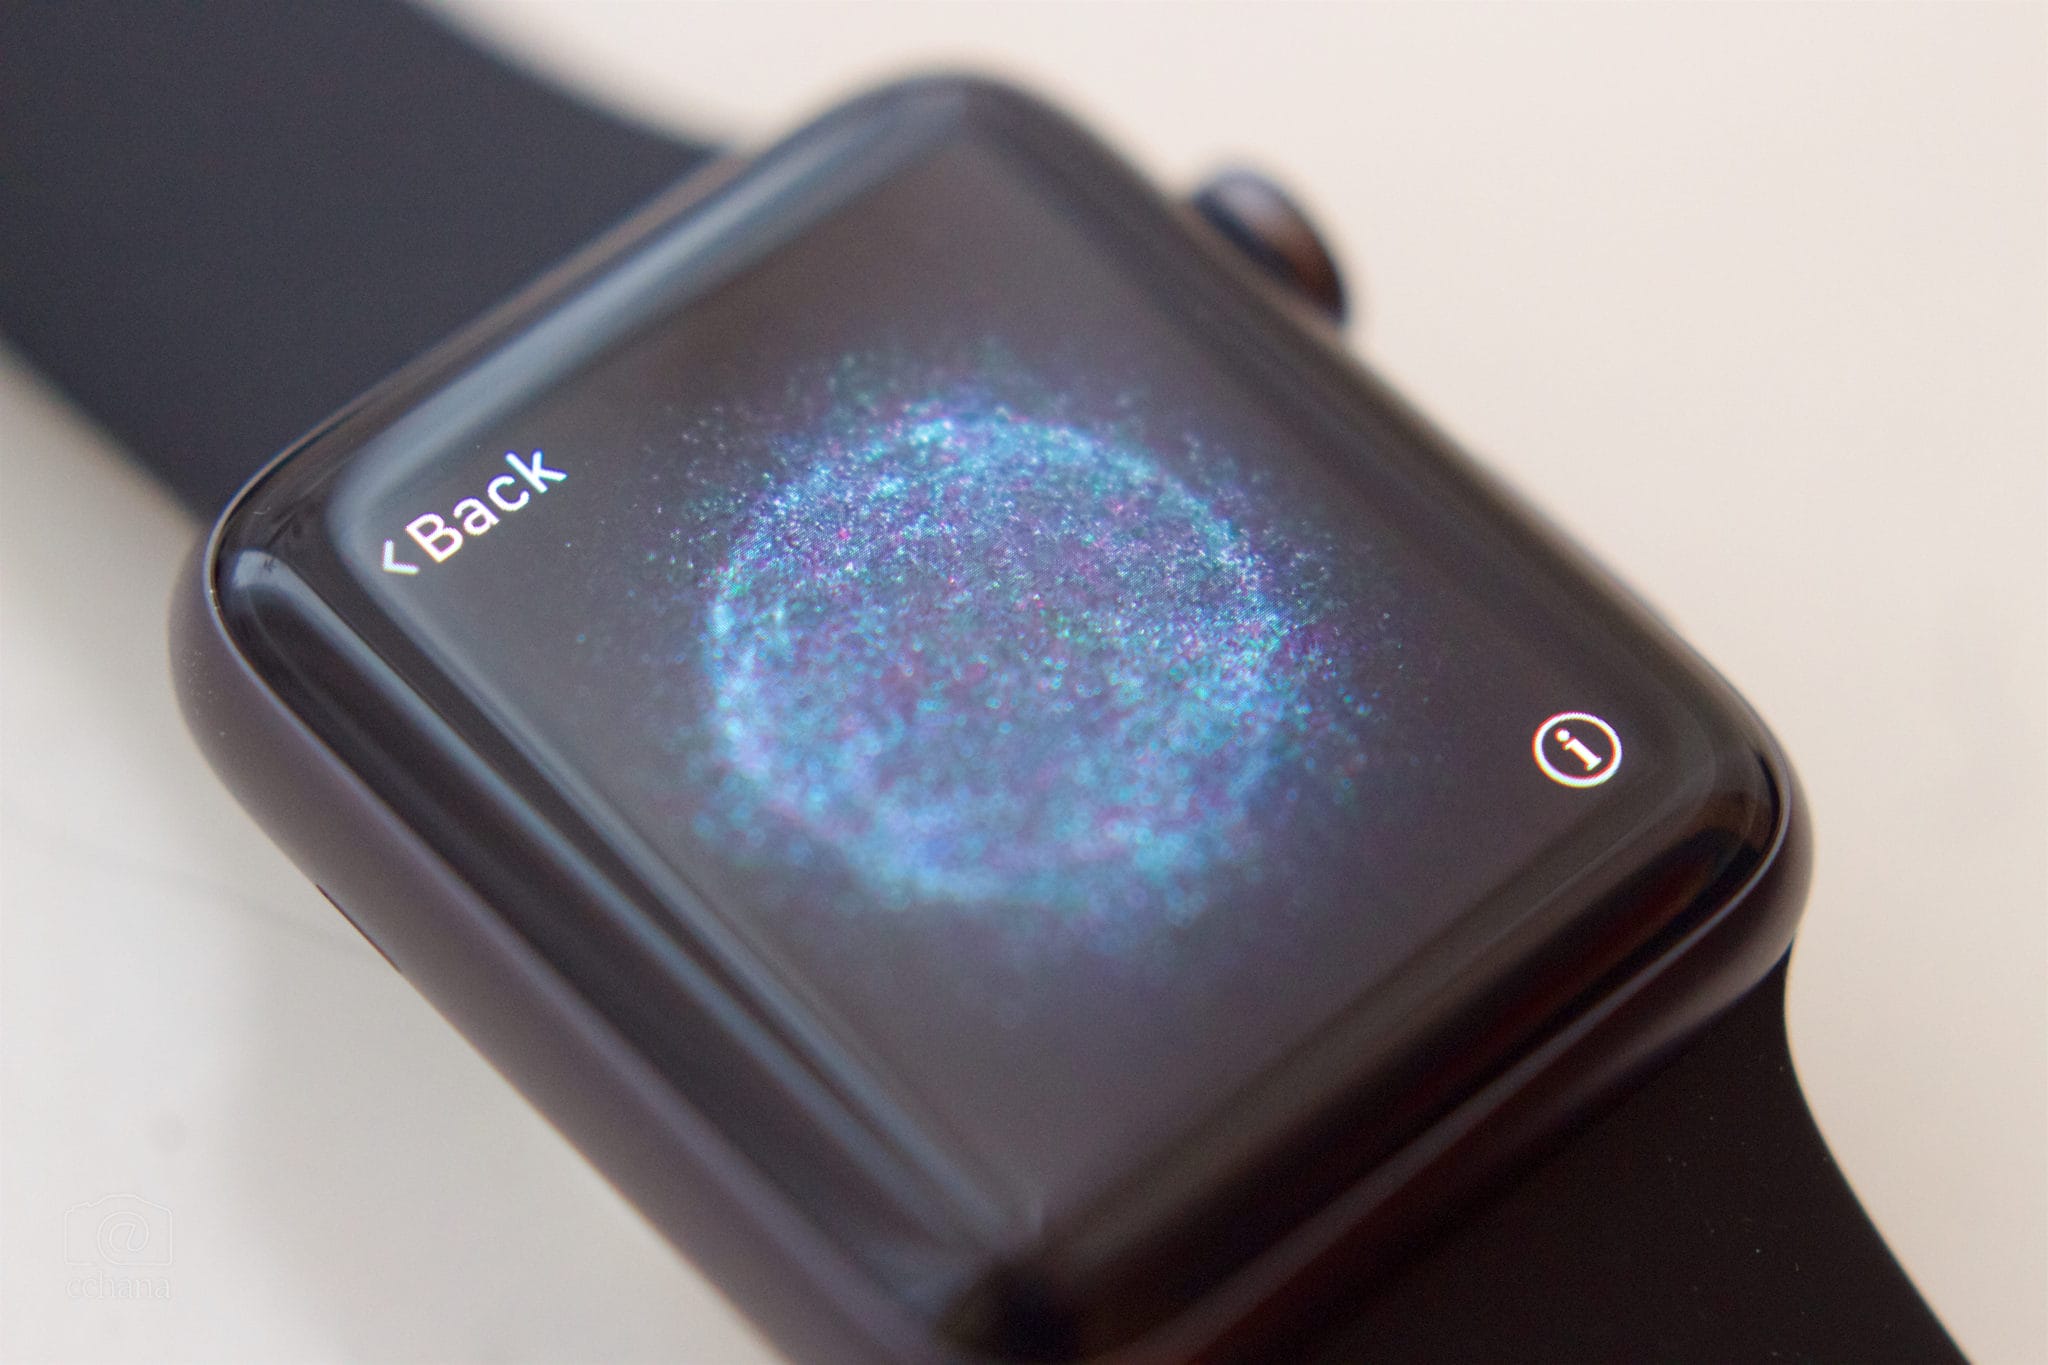 A smartwatch displaying a galaxy image on its screen, with a "back" button visible in the upper left corner.